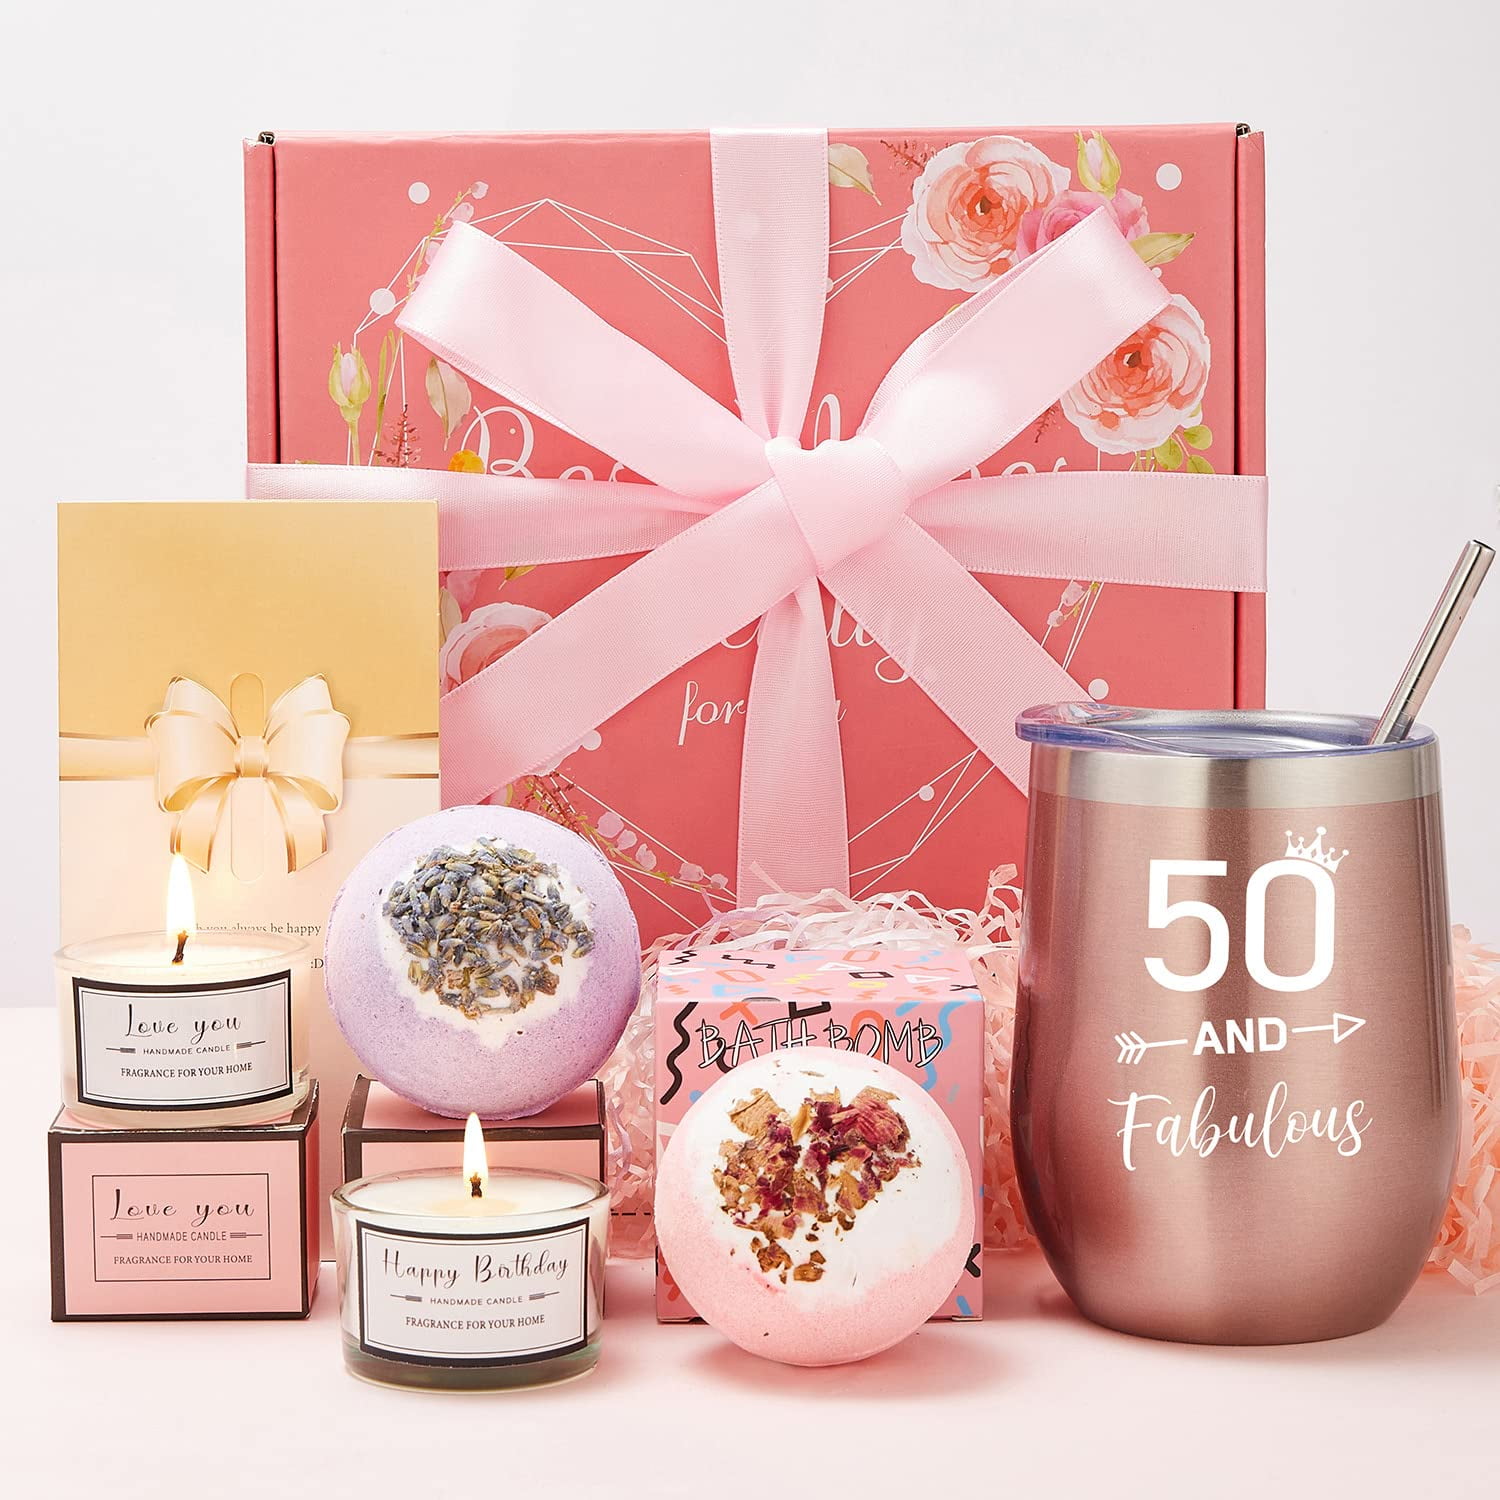 50th Birthday gifts for Women-Relaxing Spa gift Box Basket for Her Mom coworkers, Sisters, Aunt, BFF, Teachers, Nurses Unique Happy Birthday Bath Set